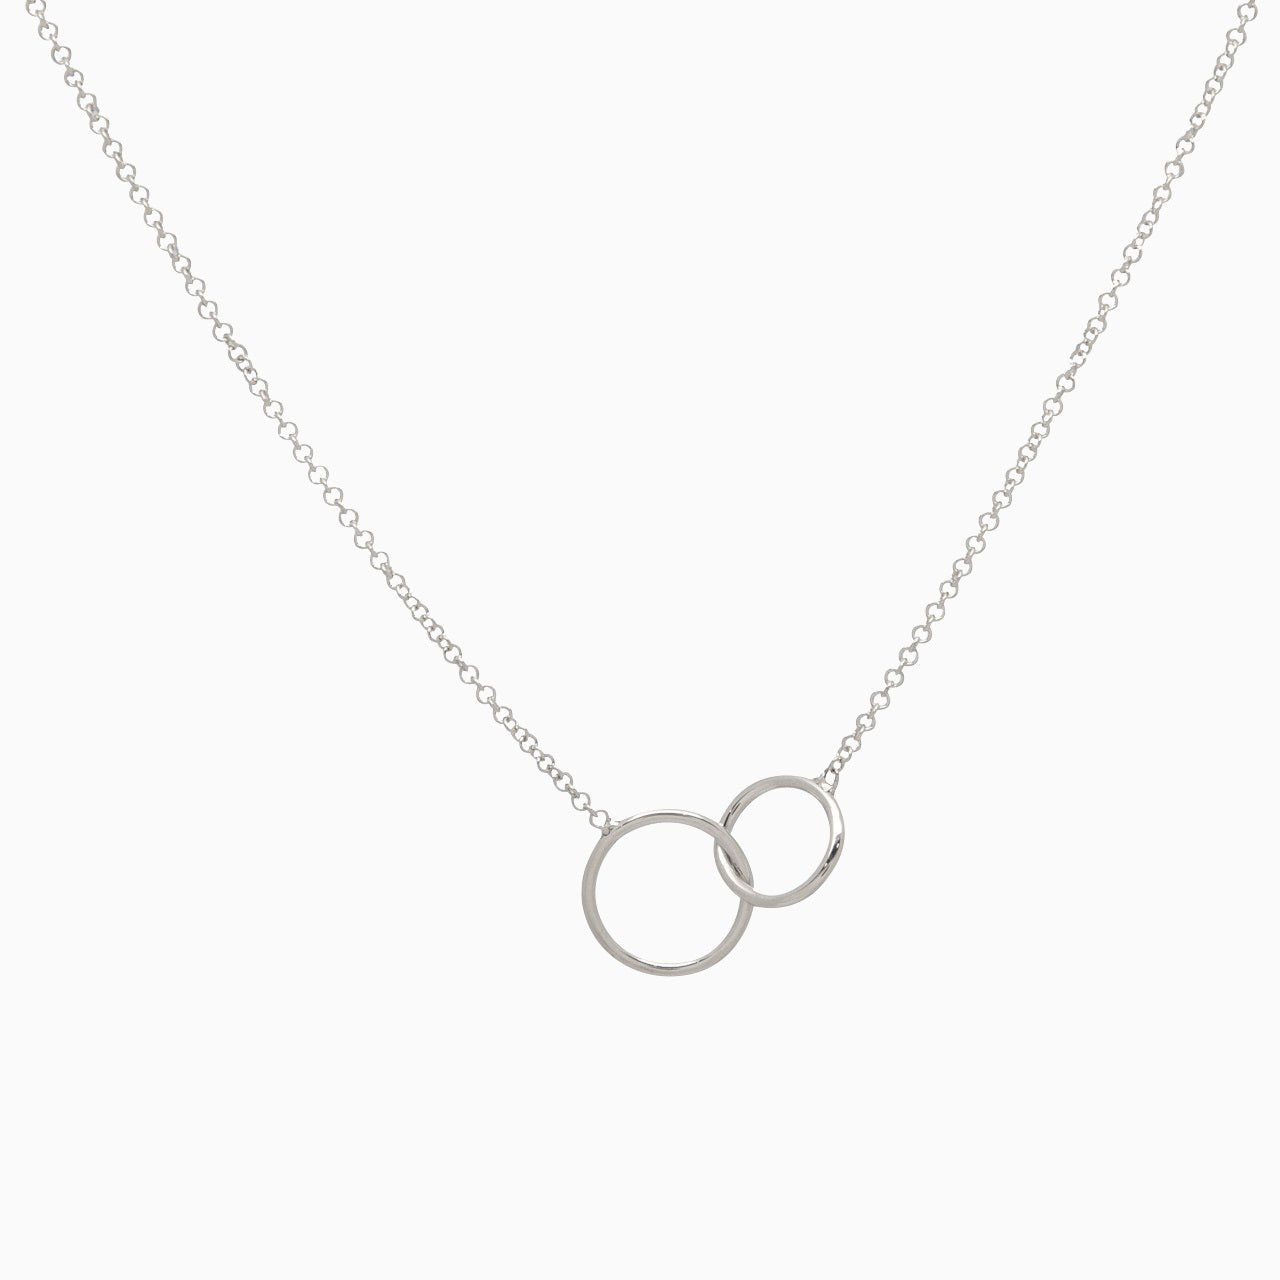 14k White Gold Coveted Connections Linked Ring Necklace